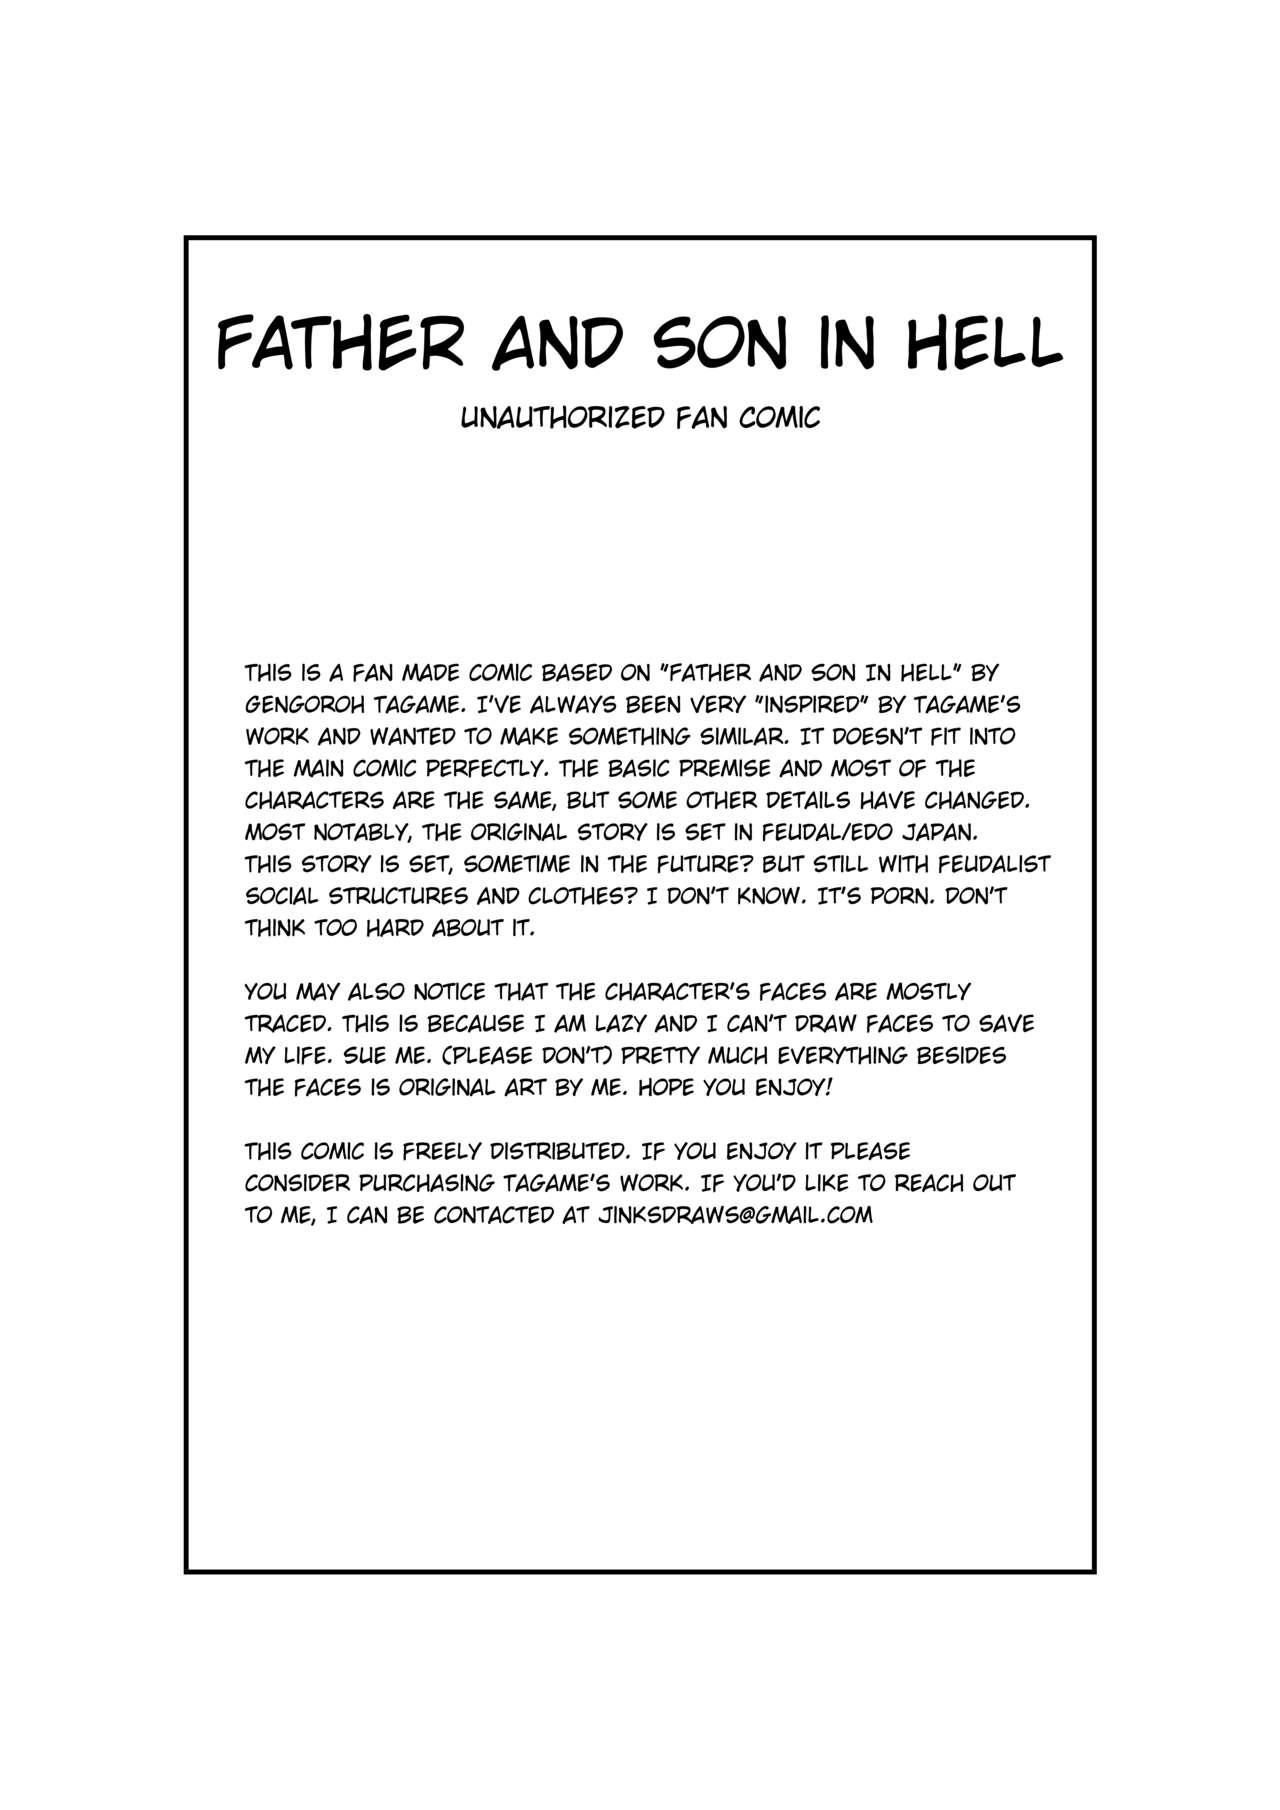 Father and Son in Hell - Unauthorized Fan Comic 0